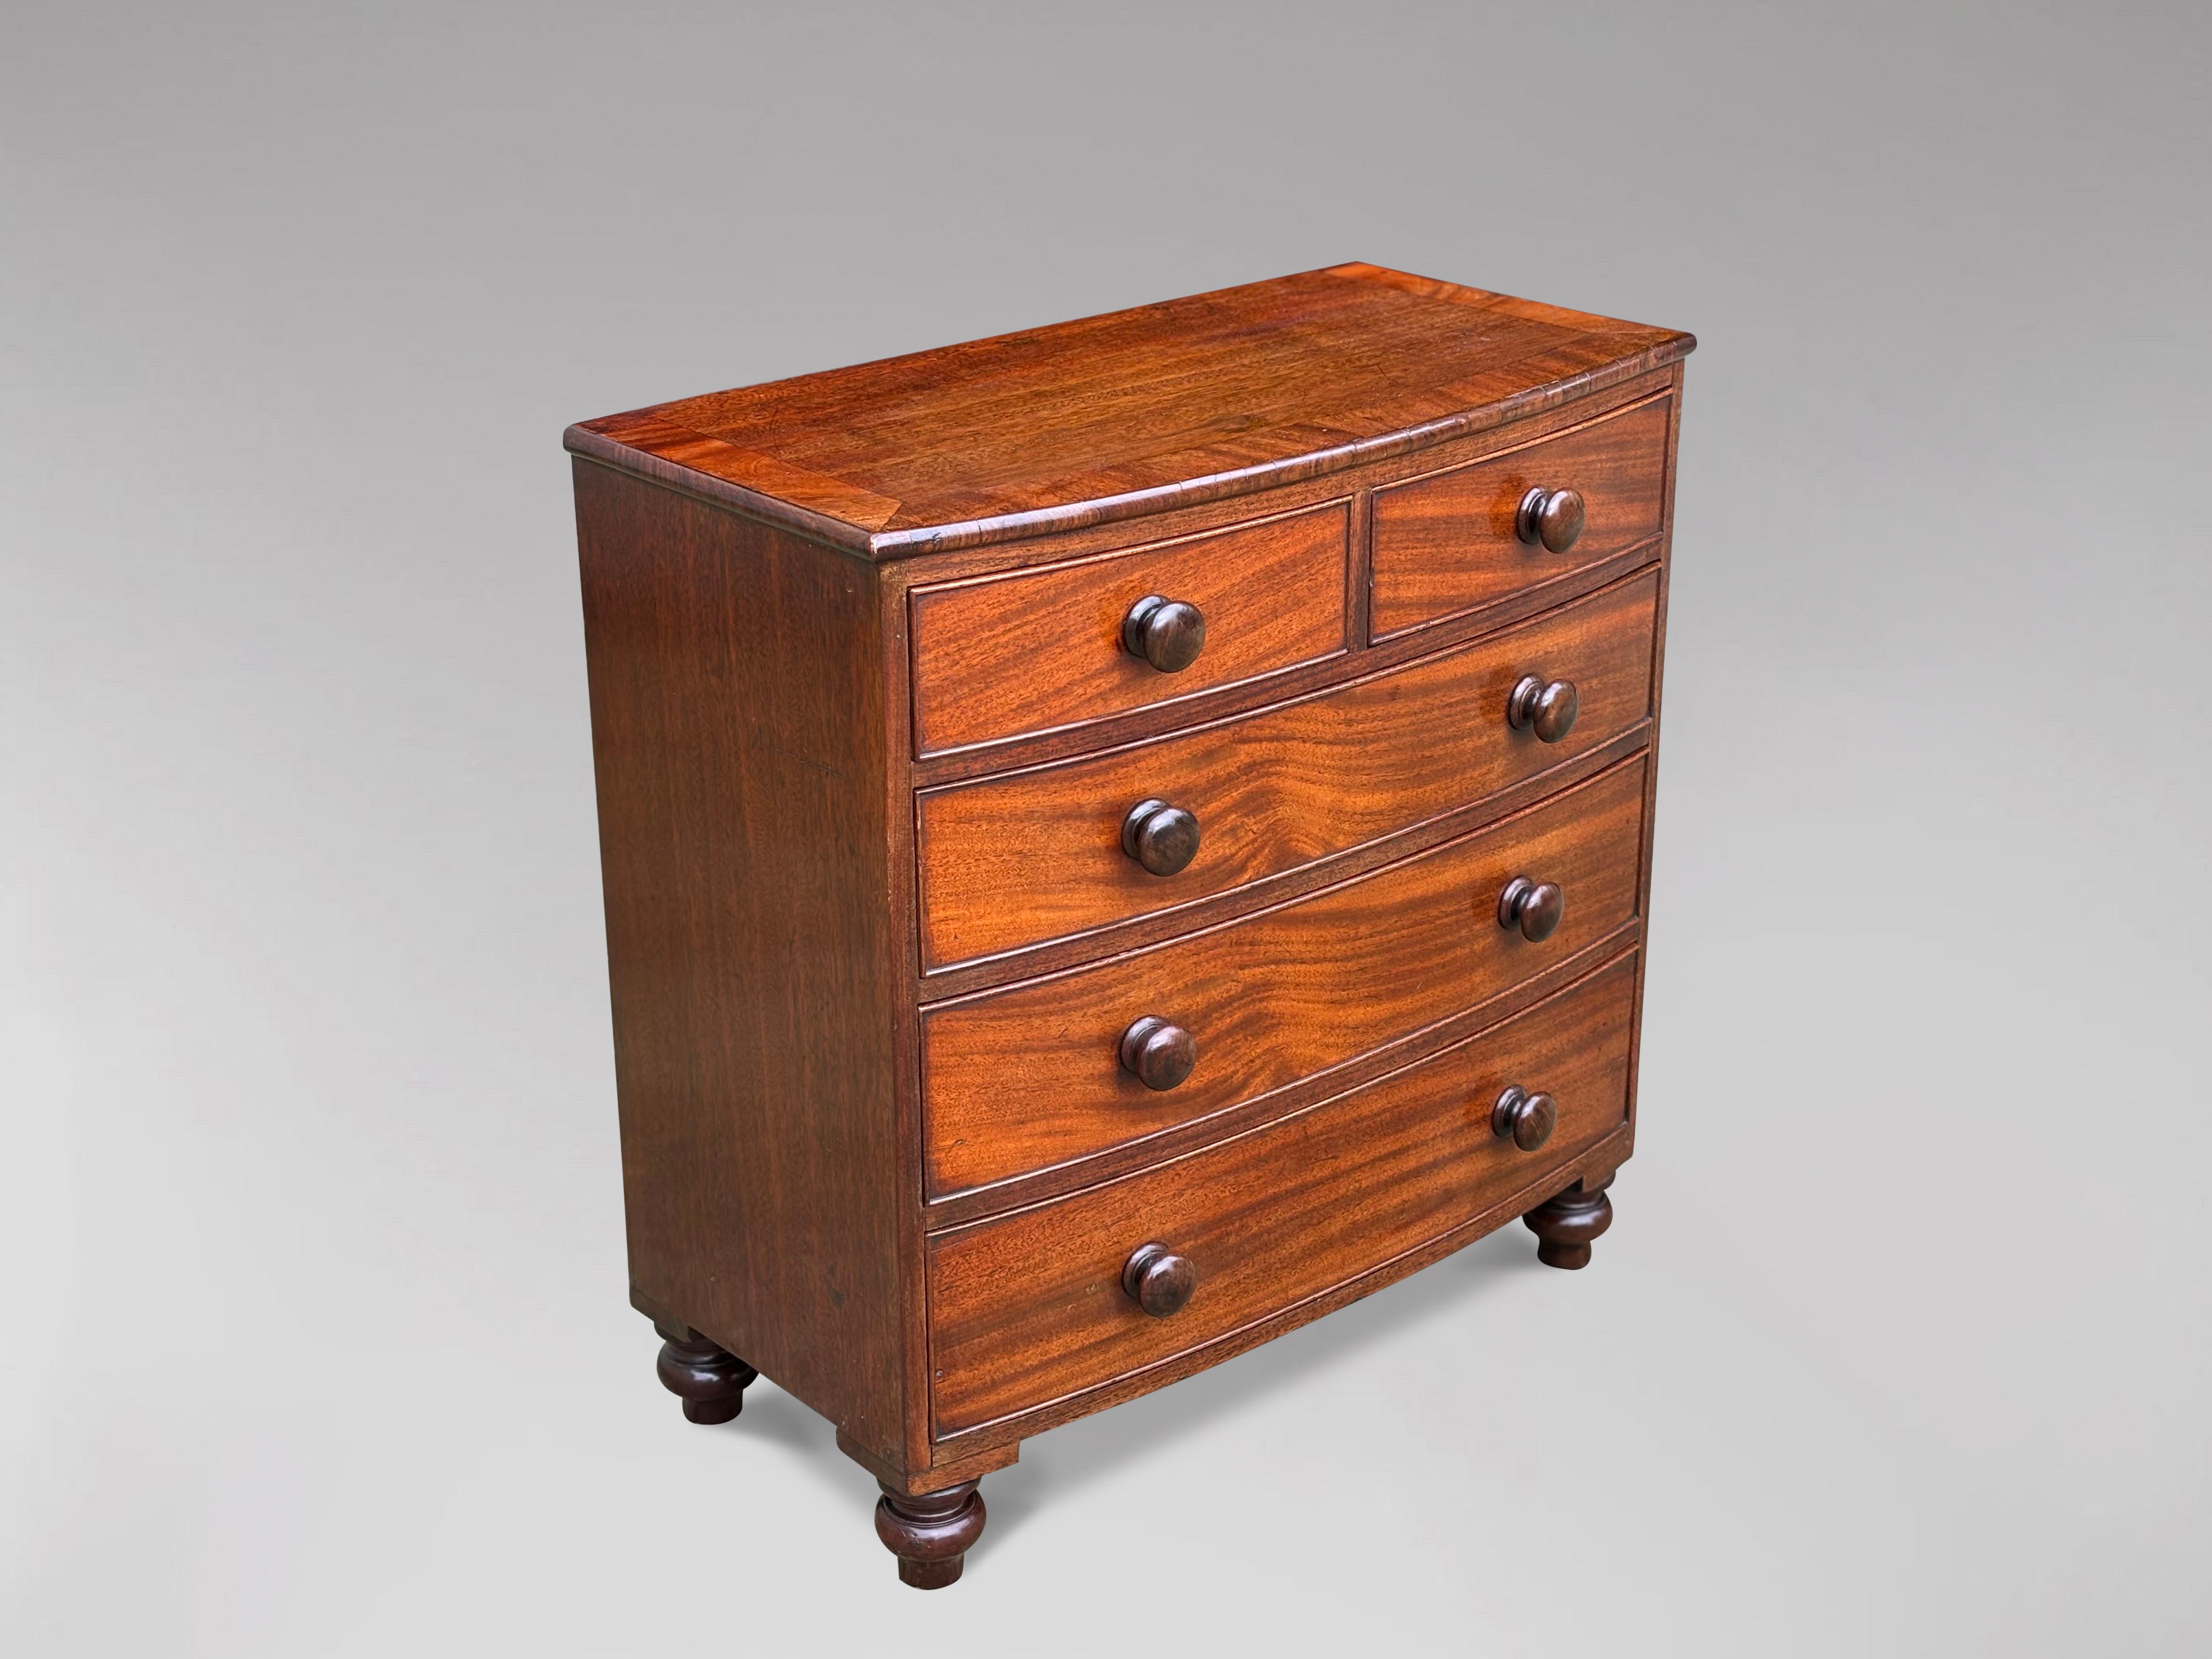 A mid 19th century mahogany miniature bow fronted chest of drawers, with moulded mahogany cross banded top, above two short over three long drawers, fitted with turned rosewood knobs. Raised on turned feet. Lovely colour mahogany and great